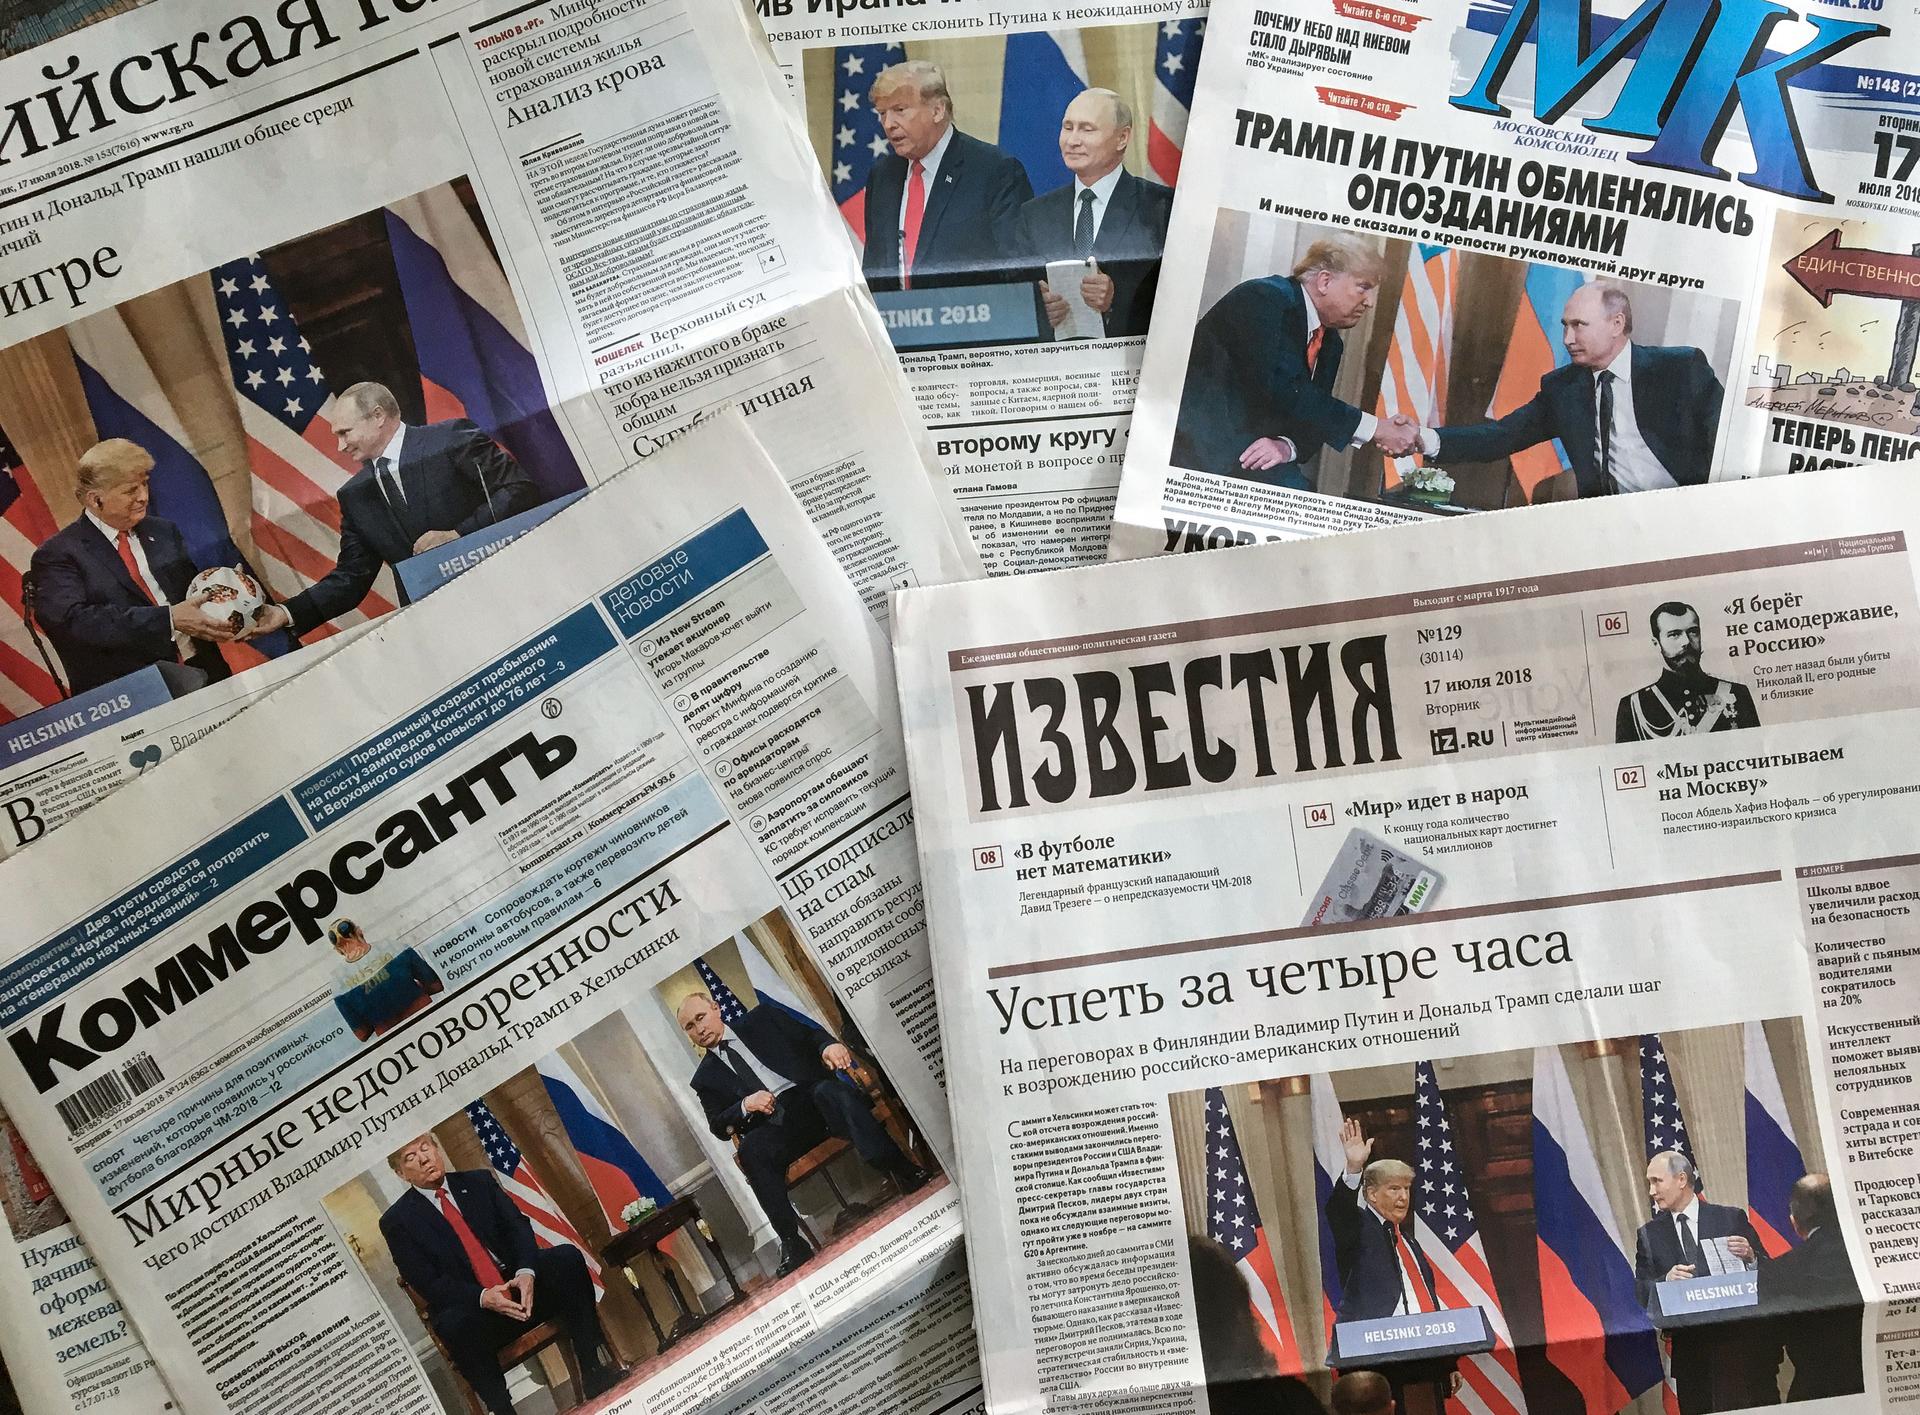 A stack of front pages from Russian newspapers depicting photos of Trump and Putin's friendly relationship.